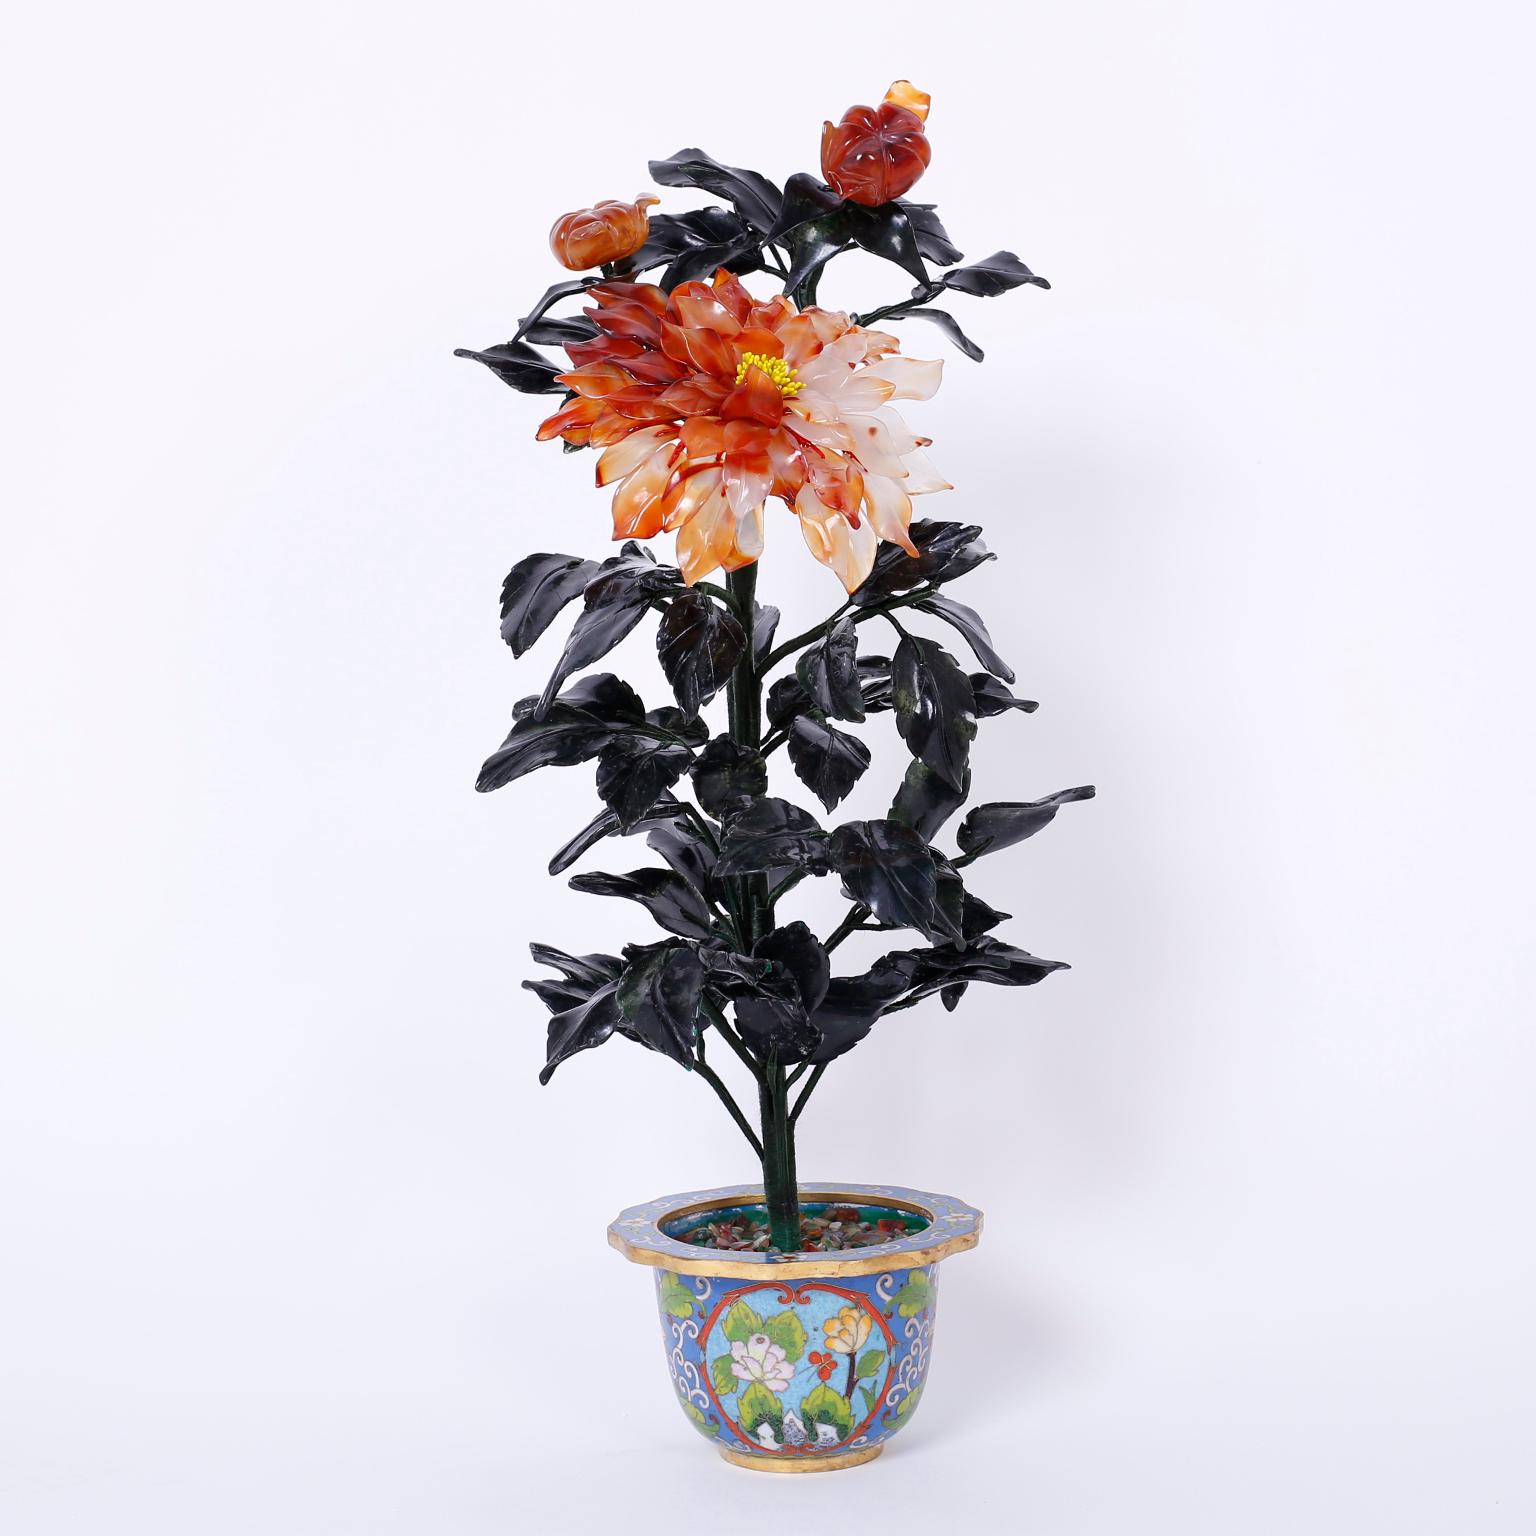 Lofty pair of Chinese flowers or Chrysanthemum plants crafted with semi-precious hard stones over a wire frame and presented in elegant cloisonné planters.